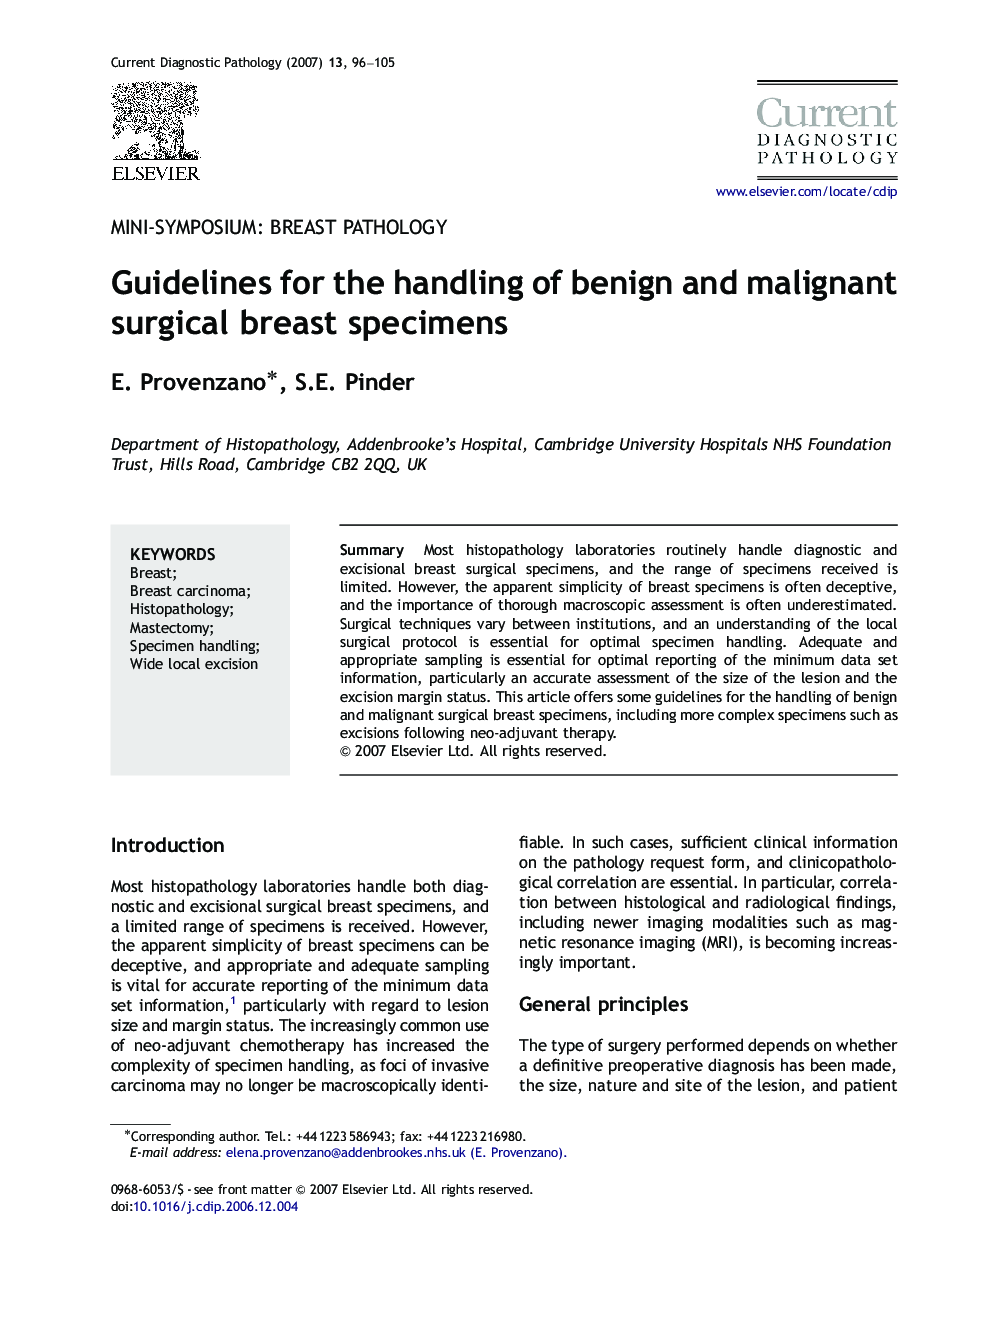 Guidelines for the handling of benign and malignant surgical breast specimens